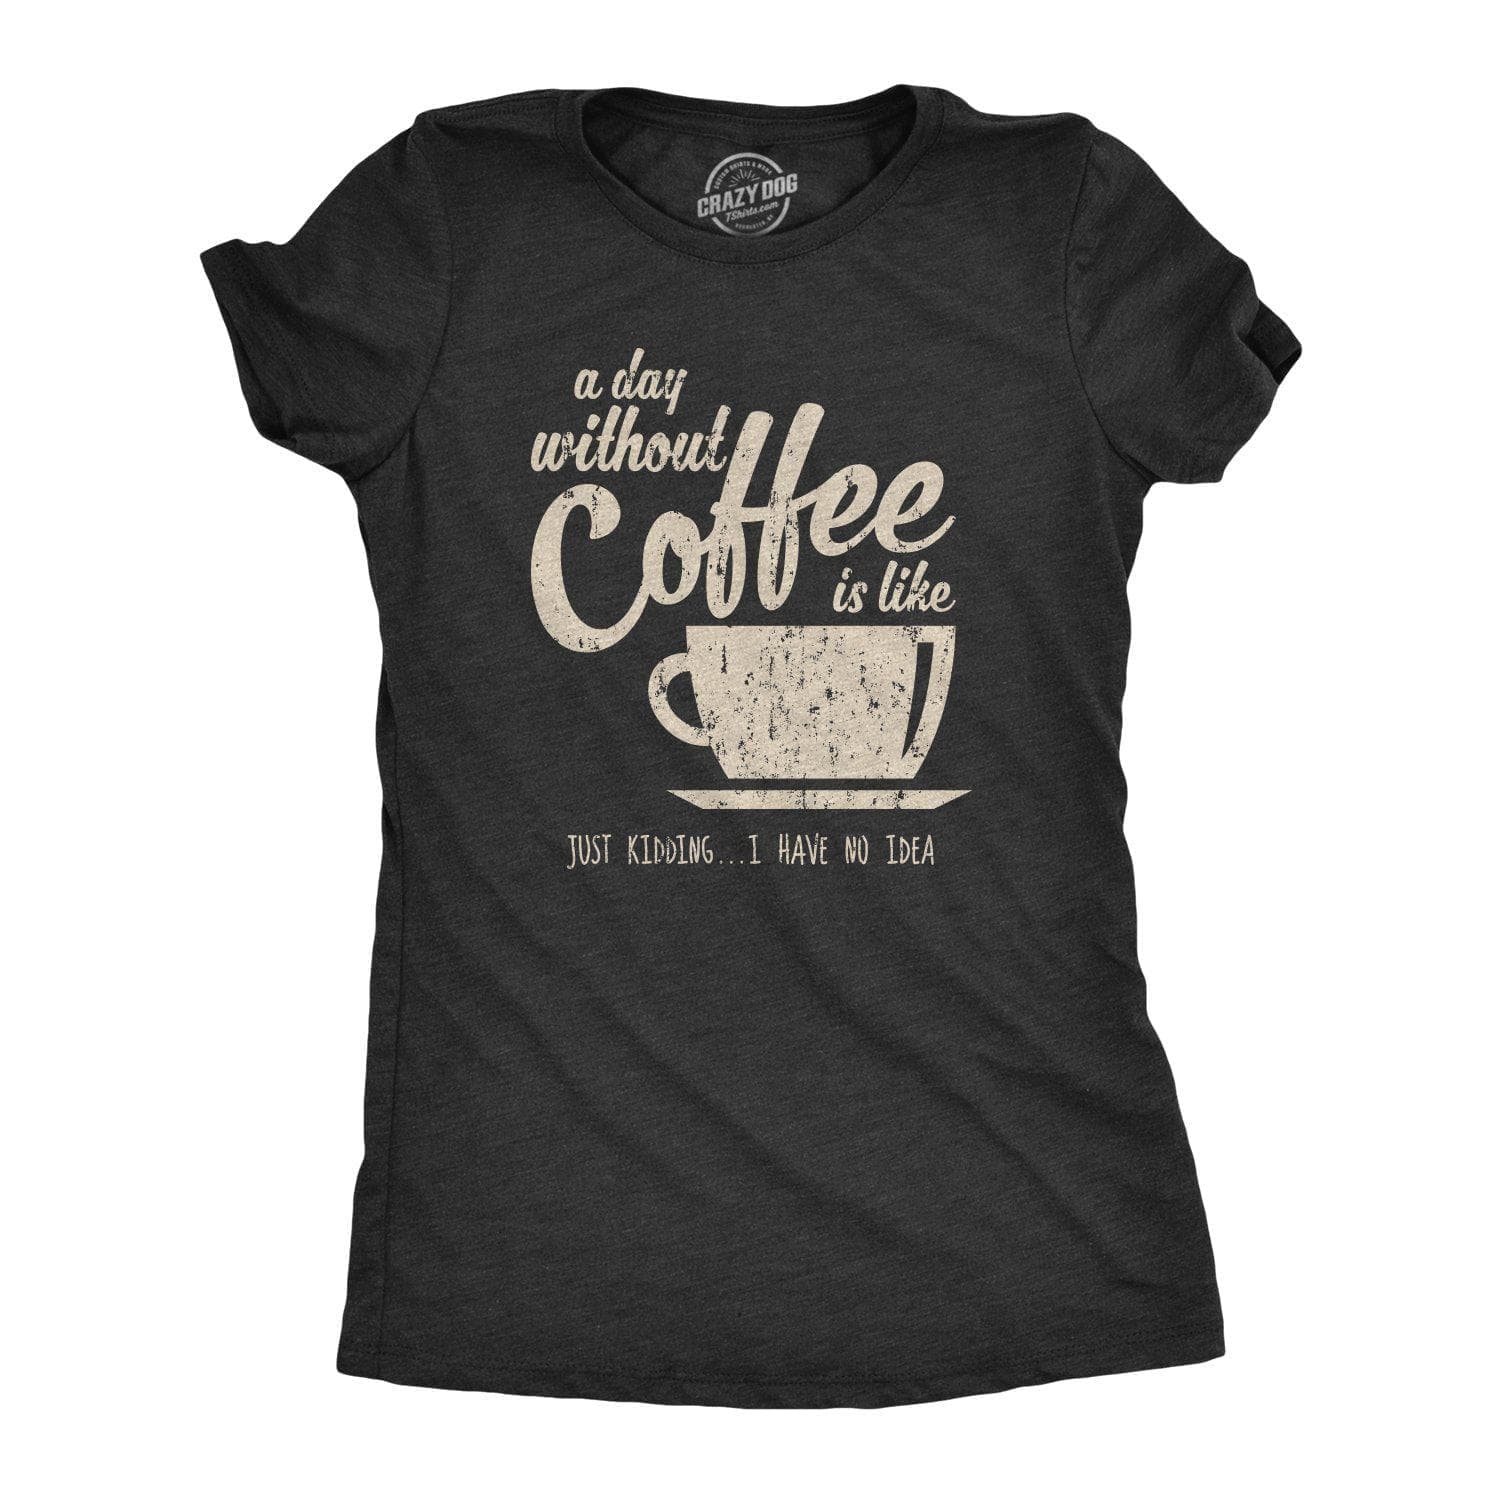 A Day Without Coffee Is Like Just Kidding I Have No Idea Women's Tshirt - Crazy Dog T-Shirts